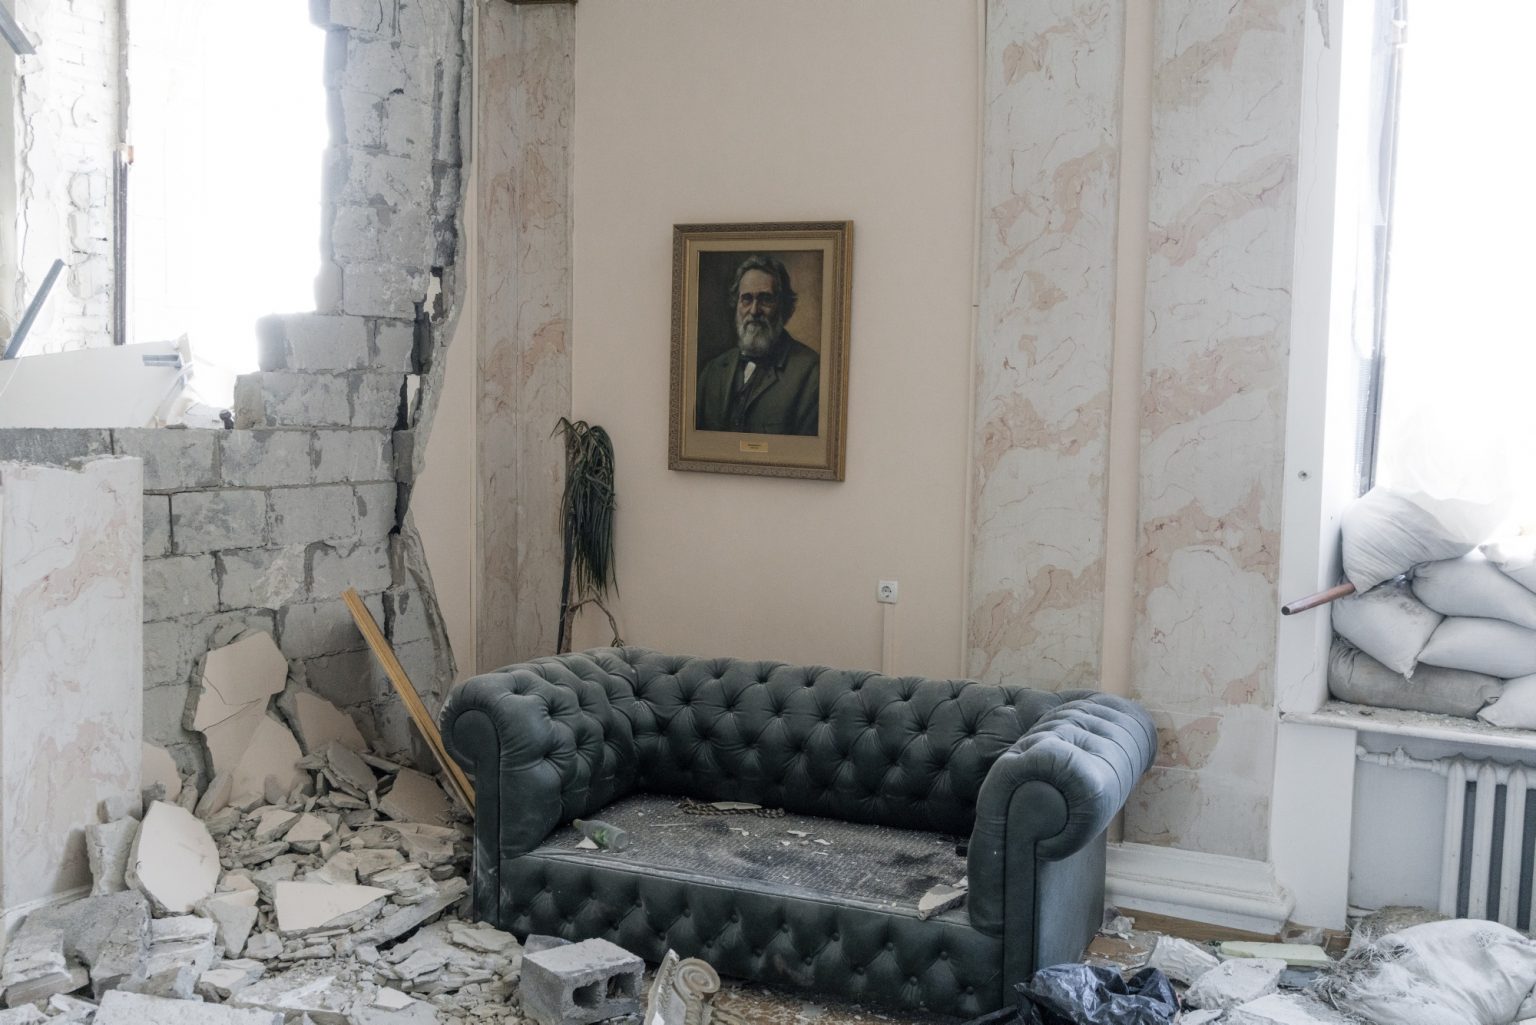 UKRAINE, Kharkiv. March 16, 2022 - The interior of the City Hall building in the central square in Kharkiv, damaged by shelling.